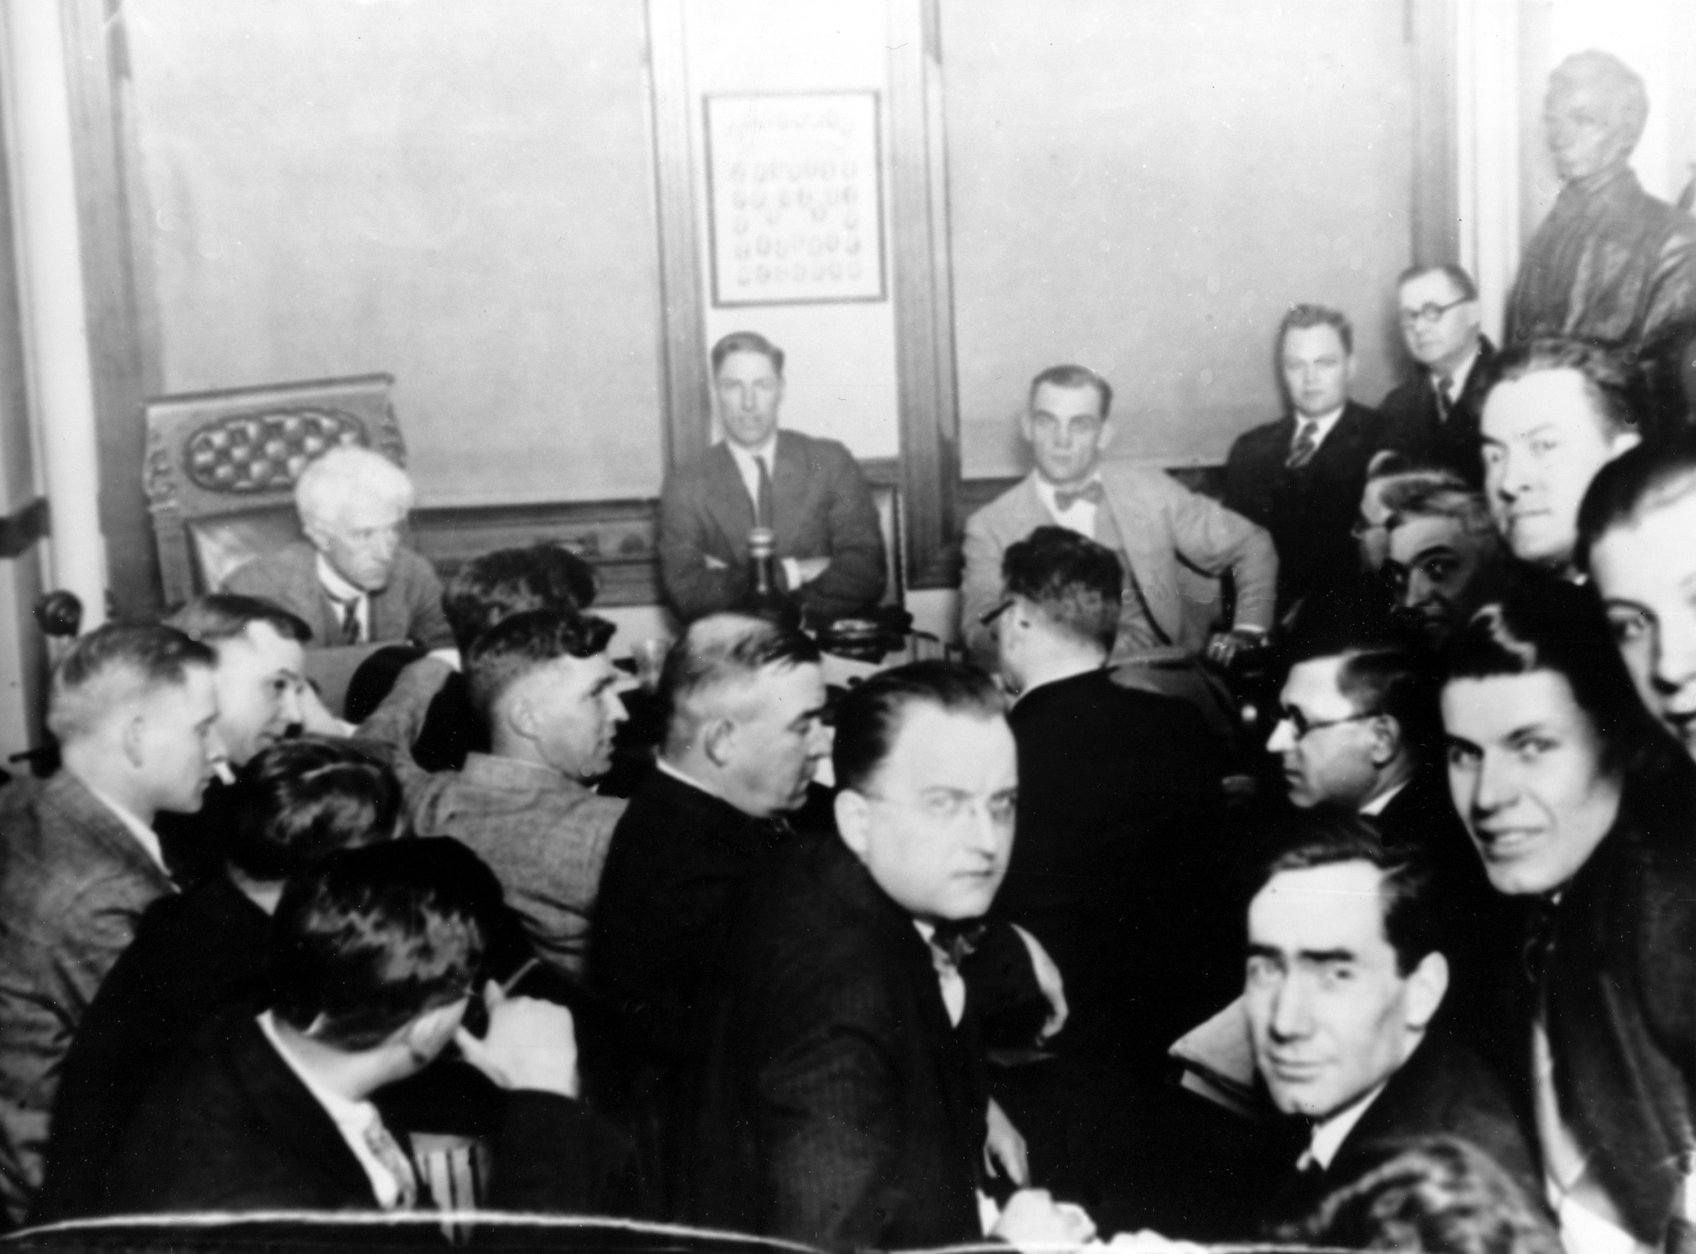 Judge Kenesaw Mountain Landis, rear left, inquires players of the Chicago White Sox, during the investigation of the infamous "Black Sox" scandal in Chicago, Ill., in 1921. Charles "Swede" Risberg, rear center, and Arnold "Chick" Gandil, next to Risberg, are two out of seven players who conspired to intentionally losing the World Series in return for bribes from professional gamblers. The incident rocked baseball and caused the introduction of Judge Landis as a baseball commissioner. Others are unidenified. (AP Photo)